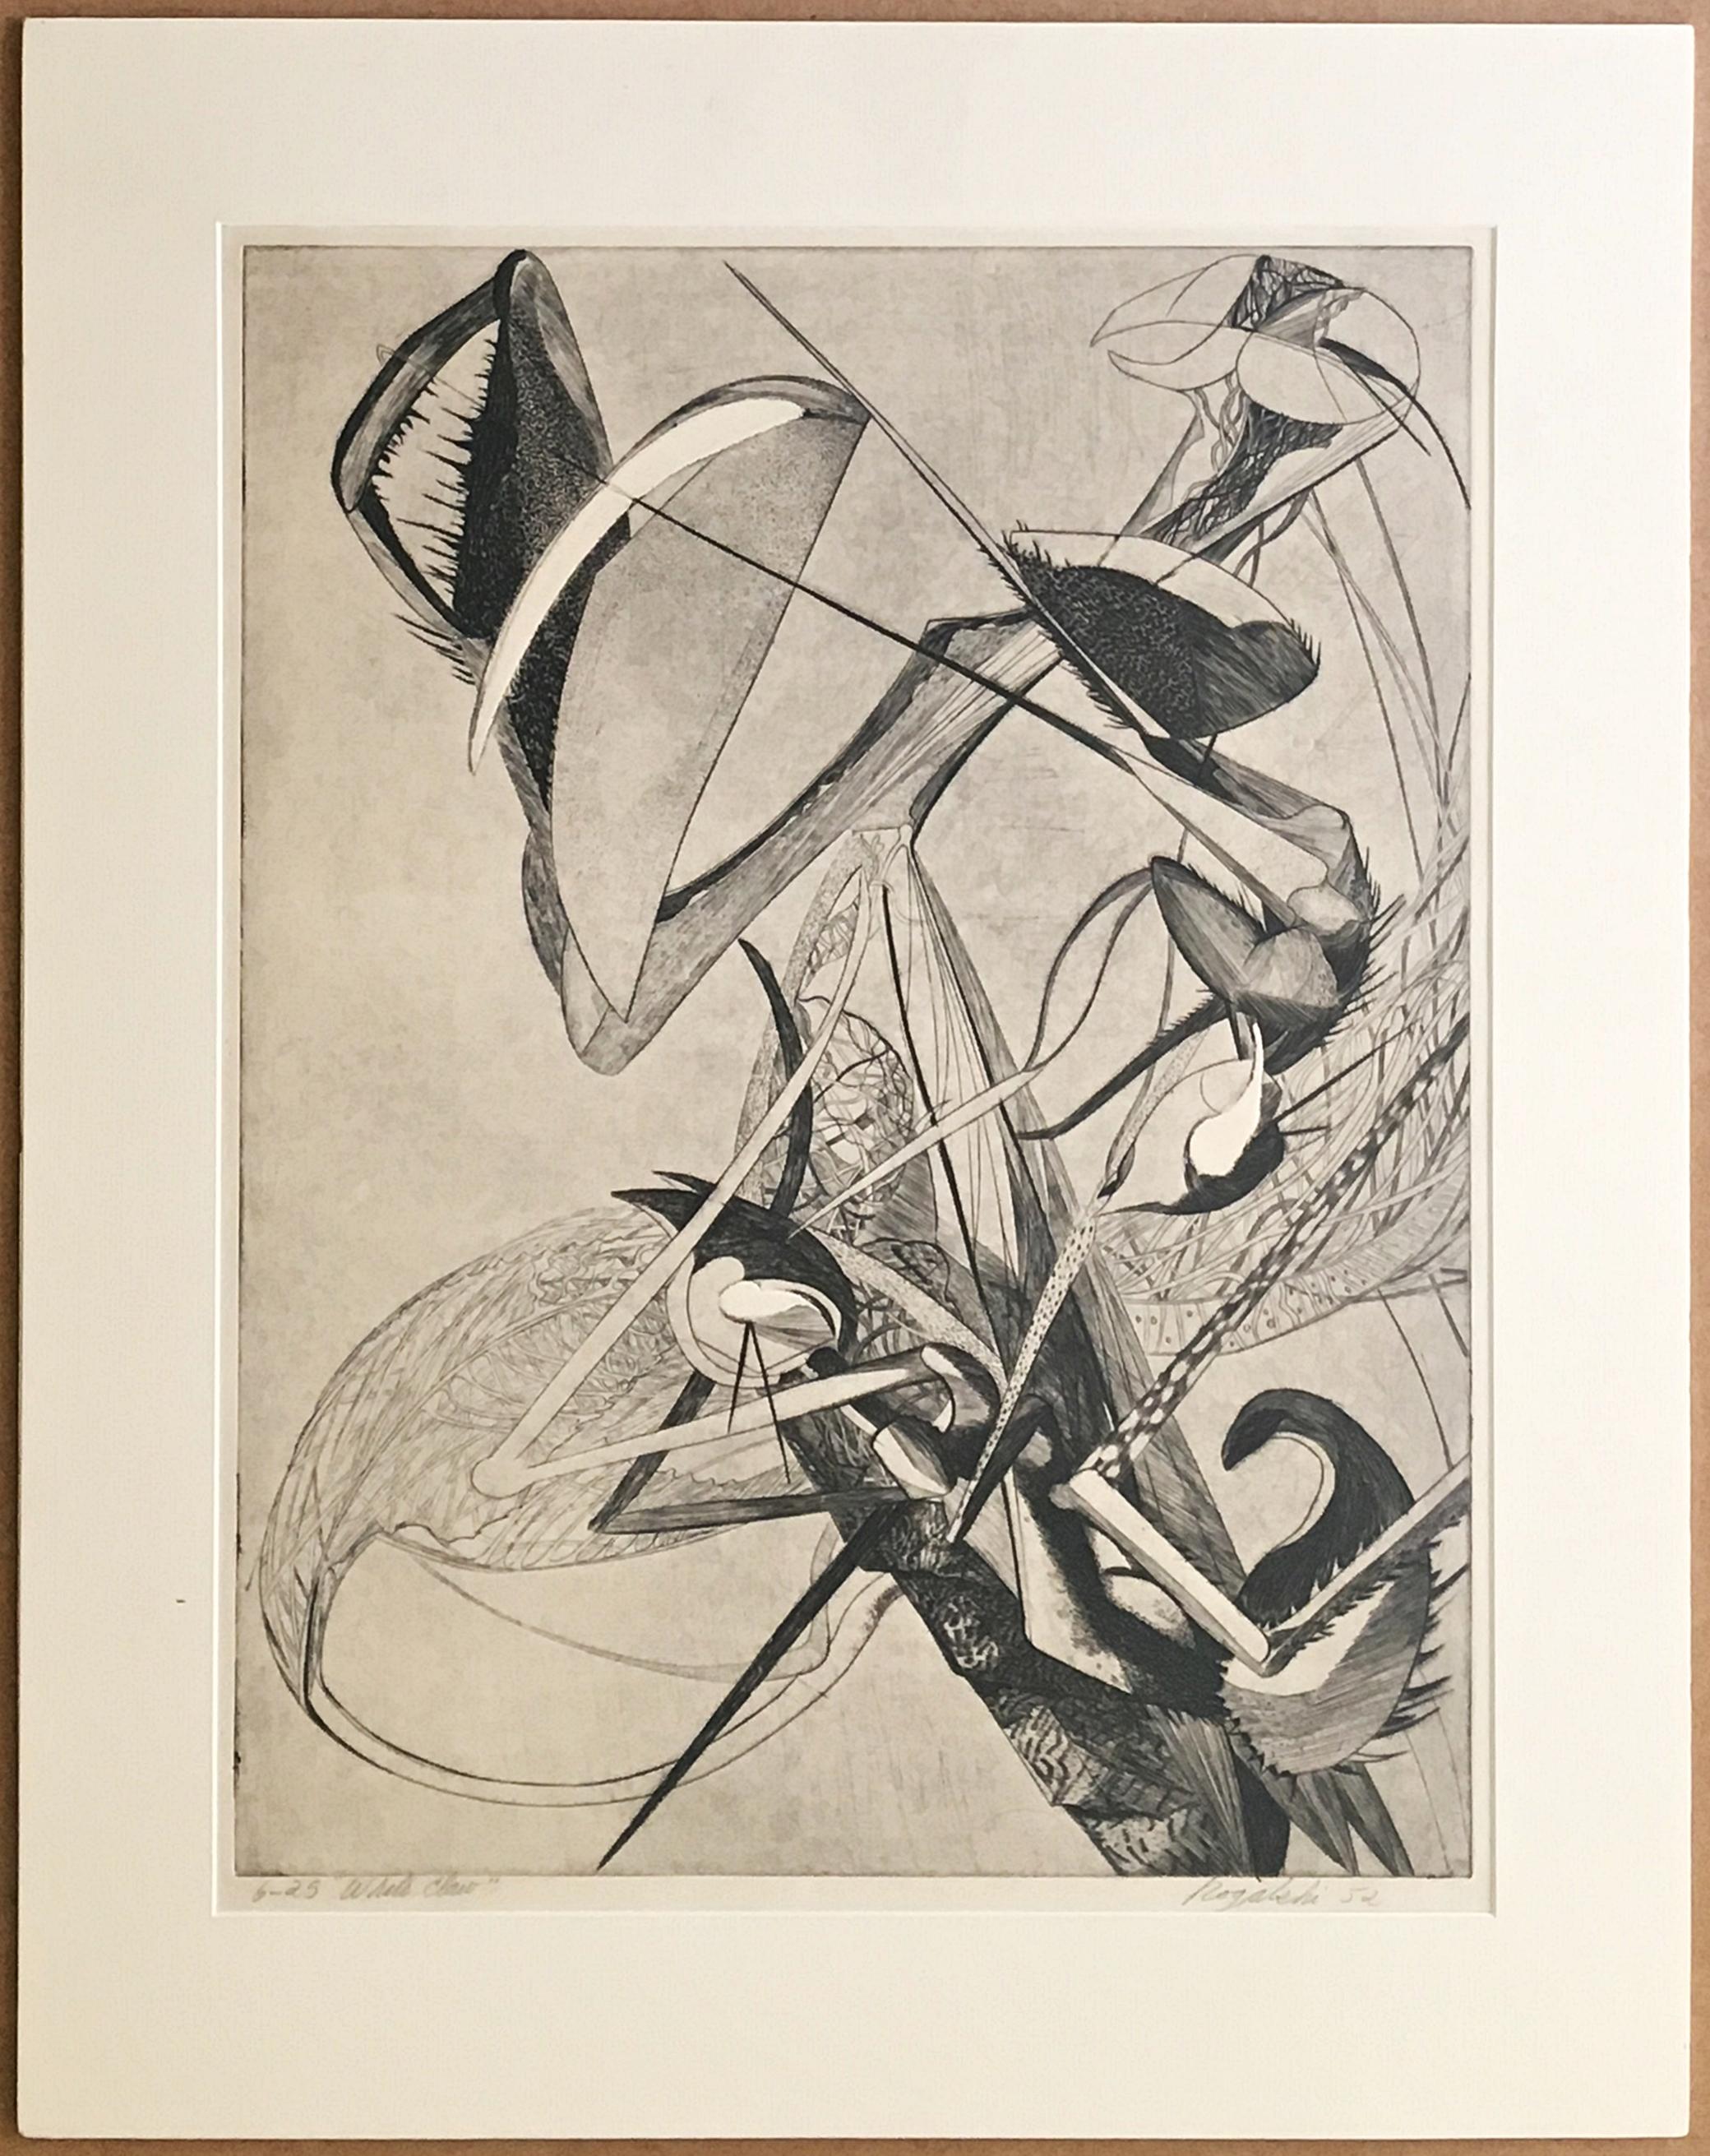 Walter Rogalski
White Claw, 1952
Engraving on antique-white laid Homere paper
Hand signed, numbered 6/25, dated and titled on lower front ; affixed to original matting
Publisher
The Print Club of Cleveland
30 3/5 × 24 1/5 inches
Unframed

